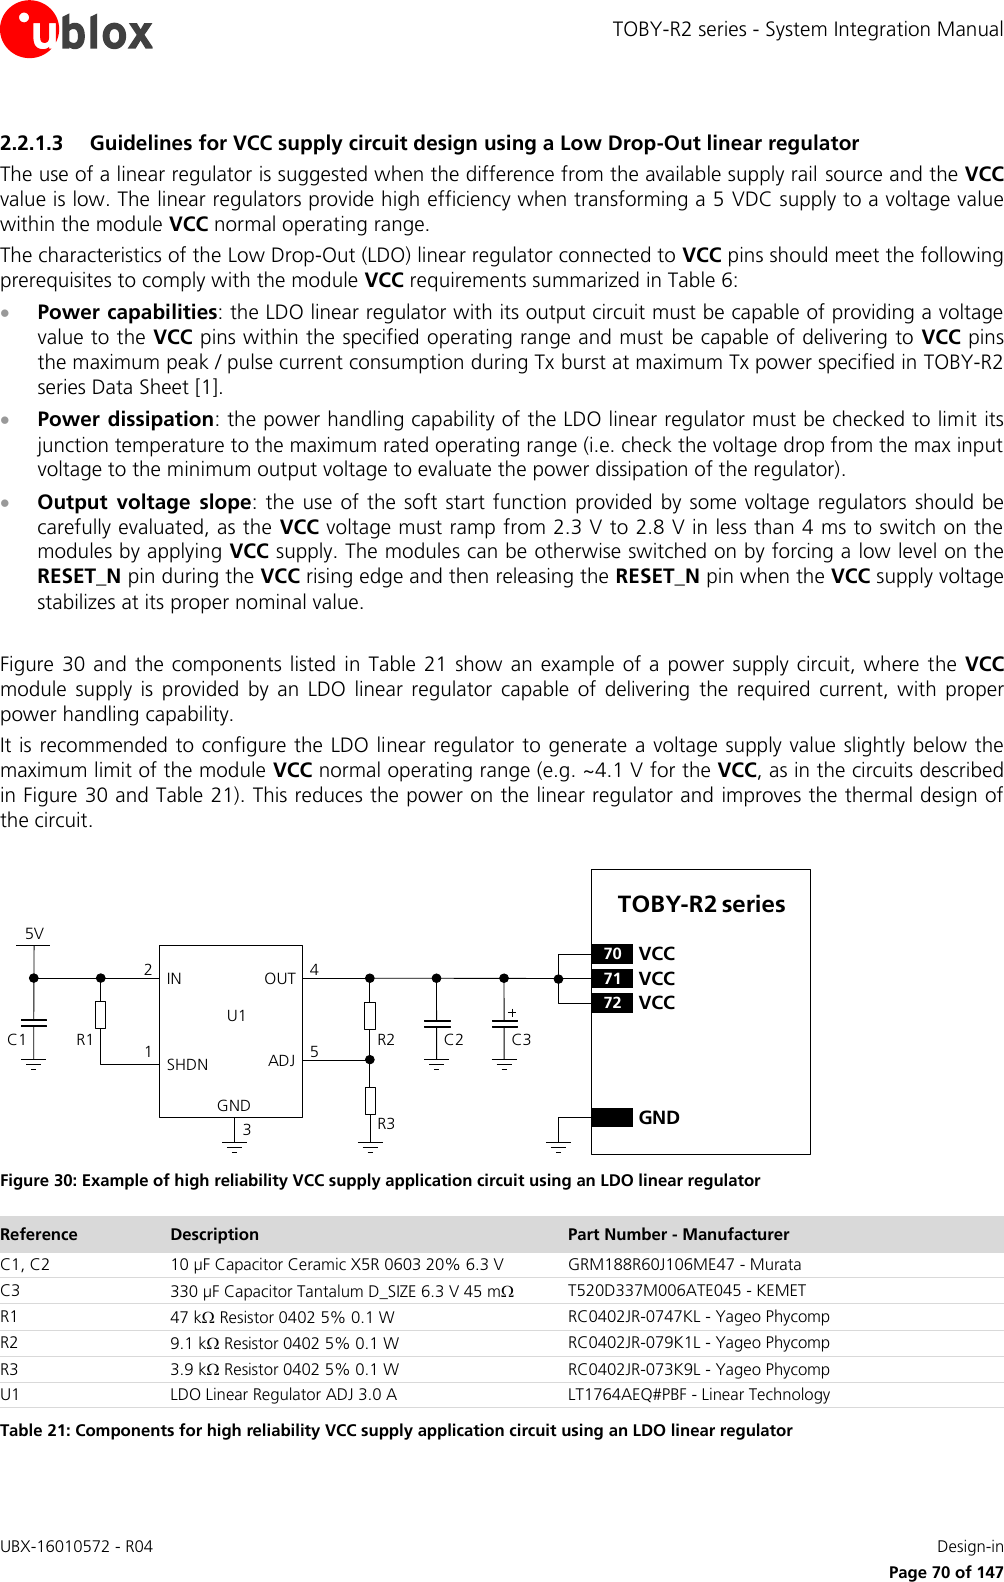 TOBY-R2 series - System Integration Manual UBX-16010572 - R04    Design-in     Page 70 of 147 2.2.1.3 Guidelines for VCC supply circuit design using a Low Drop-Out linear regulator The use of a linear regulator is suggested when the difference from the available supply rail source and the VCC value is low. The linear regulators provide high efficiency when transforming a 5 VDC supply to a voltage value within the module VCC normal operating range. The characteristics of the Low Drop-Out (LDO) linear regulator connected to VCC pins should meet the following prerequisites to comply with the module VCC requirements summarized in Table 6:  Power capabilities: the LDO linear regulator with its output circuit must be capable of providing a voltage value to the VCC pins within the specified operating range and must  be capable of delivering to  VCC pins the maximum peak / pulse current consumption during Tx burst at maximum Tx power specified in TOBY-R2 series Data Sheet [1].  Power dissipation: the power handling capability of the LDO linear regulator must be checked to limit its junction temperature to the maximum rated operating range (i.e. check the voltage drop from the max input voltage to the minimum output voltage to evaluate the power dissipation of the regulator).  Output  voltage  slope: the  use  of  the soft start function provided  by  some voltage  regulators  should be carefully evaluated, as the  VCC voltage must ramp from 2.3 V to 2.8 V in less than 4 ms to switch on the modules by applying VCC supply. The modules can be otherwise switched on by forcing a low level on the RESET_N pin during the VCC rising edge and then releasing the RESET_N pin when the VCC supply voltage stabilizes at its proper nominal value.  Figure 30 and  the  components  listed  in Table 21  show  an example of a power supply circuit, where  the VCC module  supply  is  provided  by  an  LDO  linear  regulator  capable  of  delivering  the  required  current,  with  proper power handling capability. It is recommended to configure the LDO linear regulator  to generate a voltage supply value slightly below the maximum limit of the module VCC normal operating range (e.g. ~4.1 V for the VCC, as in the circuits described in Figure 30 and Table 21). This reduces the power on the linear regulator and improves the thermal design of the circuit.  5VC1 R1IN OUTADJGND12453C2R2R3U1SHDNTOBY-R2 series71 VCC72 VCC70 VCCGNDC3 Figure 30: Example of high reliability VCC supply application circuit using an LDO linear regulator Reference Description Part Number - Manufacturer C1, C2 10 µF Capacitor Ceramic X5R 0603 20% 6.3 V GRM188R60J106ME47 - Murata C3 330 µF Capacitor Tantalum D_SIZE 6.3 V 45 m T520D337M006ATE045 - KEMET R1 47 k Resistor 0402 5% 0.1 W RC0402JR-0747KL - Yageo Phycomp R2 9.1 k Resistor 0402 5% 0.1 W RC0402JR-079K1L - Yageo Phycomp R3 3.9 k Resistor 0402 5% 0.1 W RC0402JR-073K9L - Yageo Phycomp U1 LDO Linear Regulator ADJ 3.0 A LT1764AEQ#PBF - Linear Technology Table 21: Components for high reliability VCC supply application circuit using an LDO linear regulator 